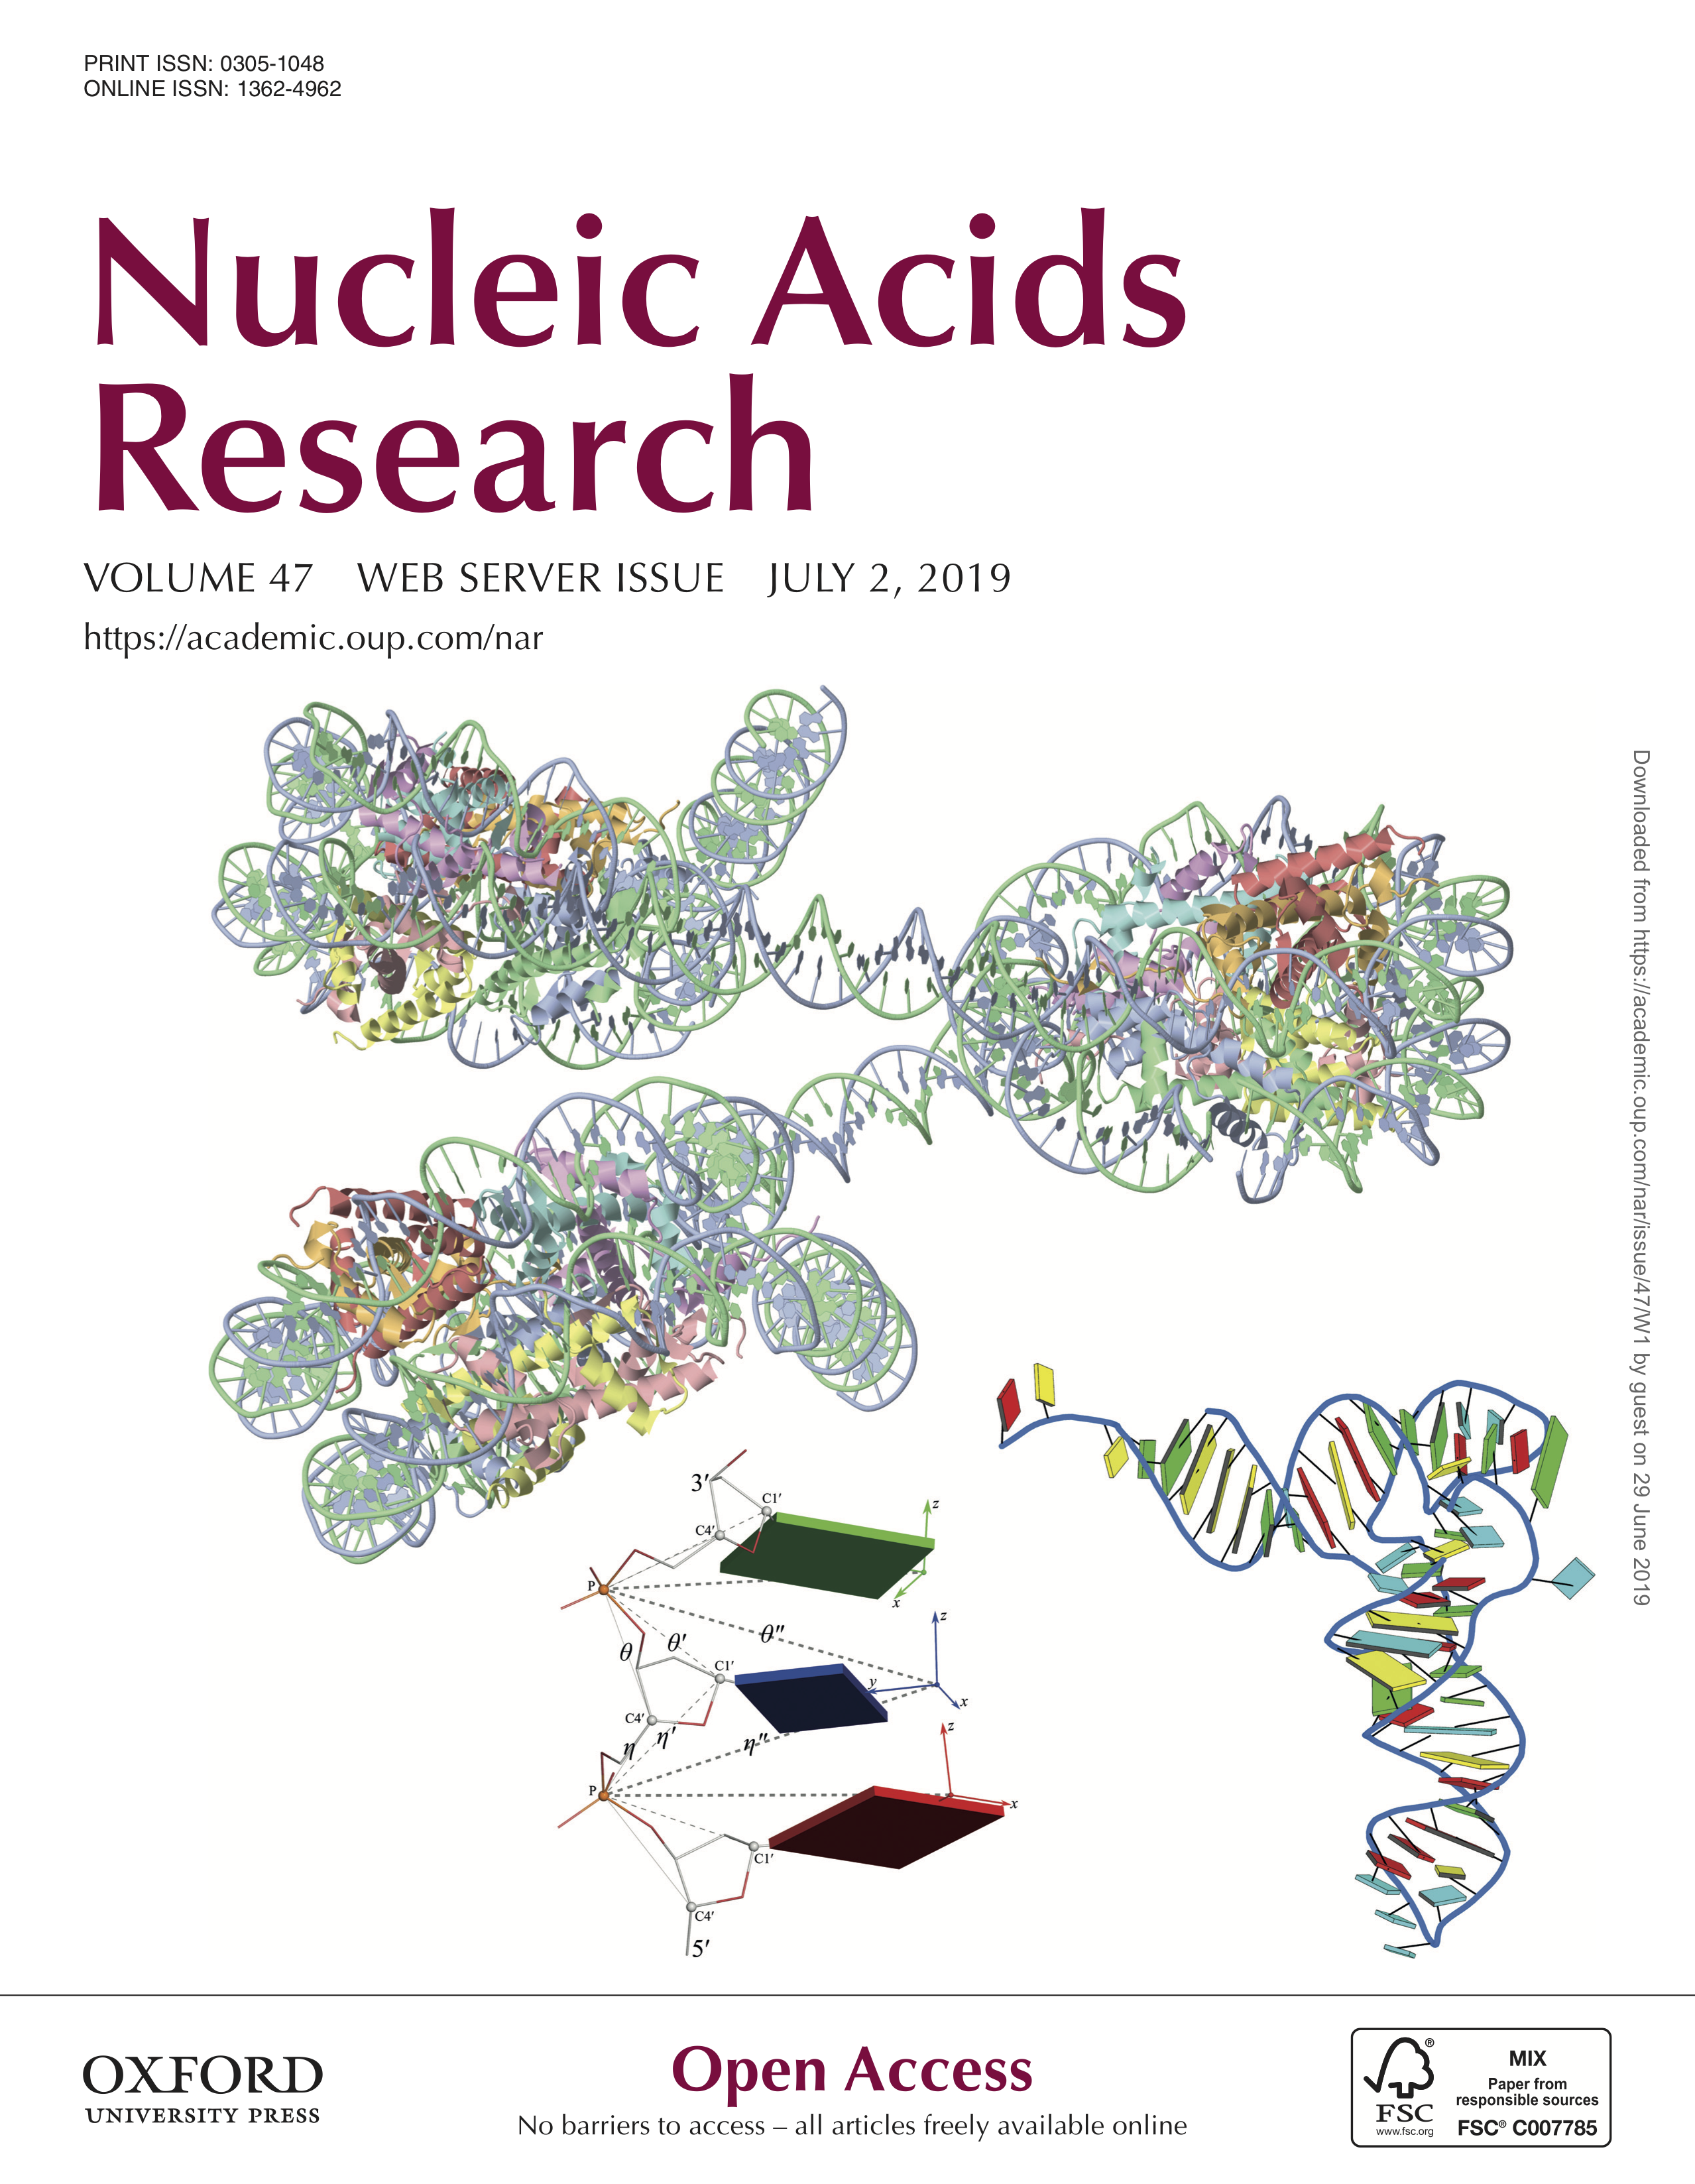 Web 3DNA 2.0 highlighted in the cover of the NAR'19 webserver issue